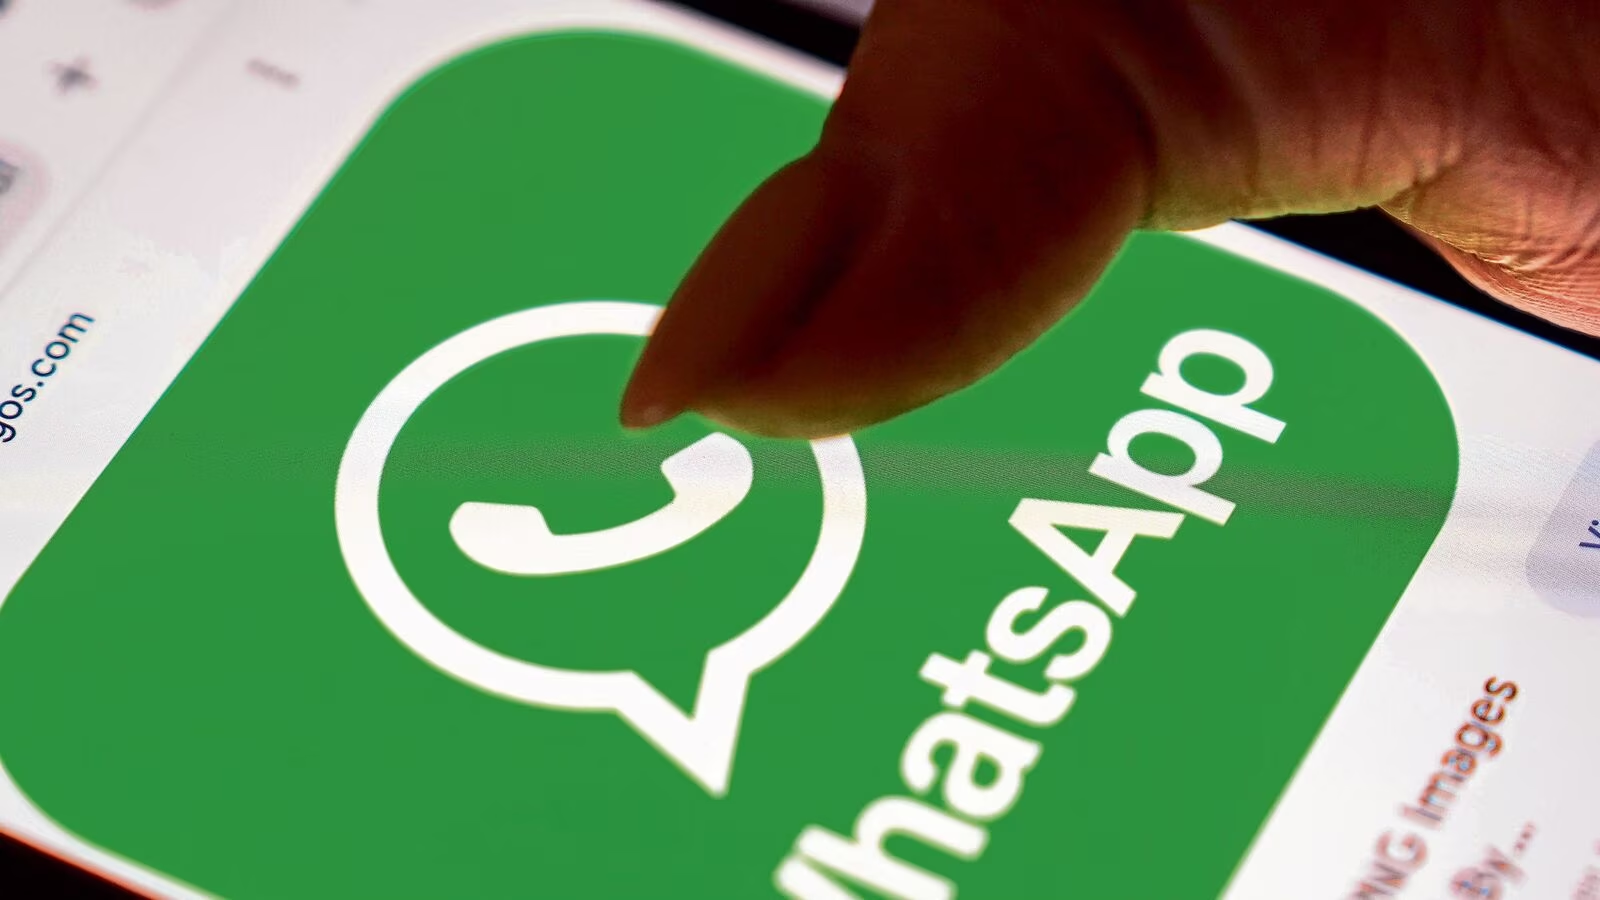 England WhatsApp Number Acquisition - WhatsApp Data Purchase